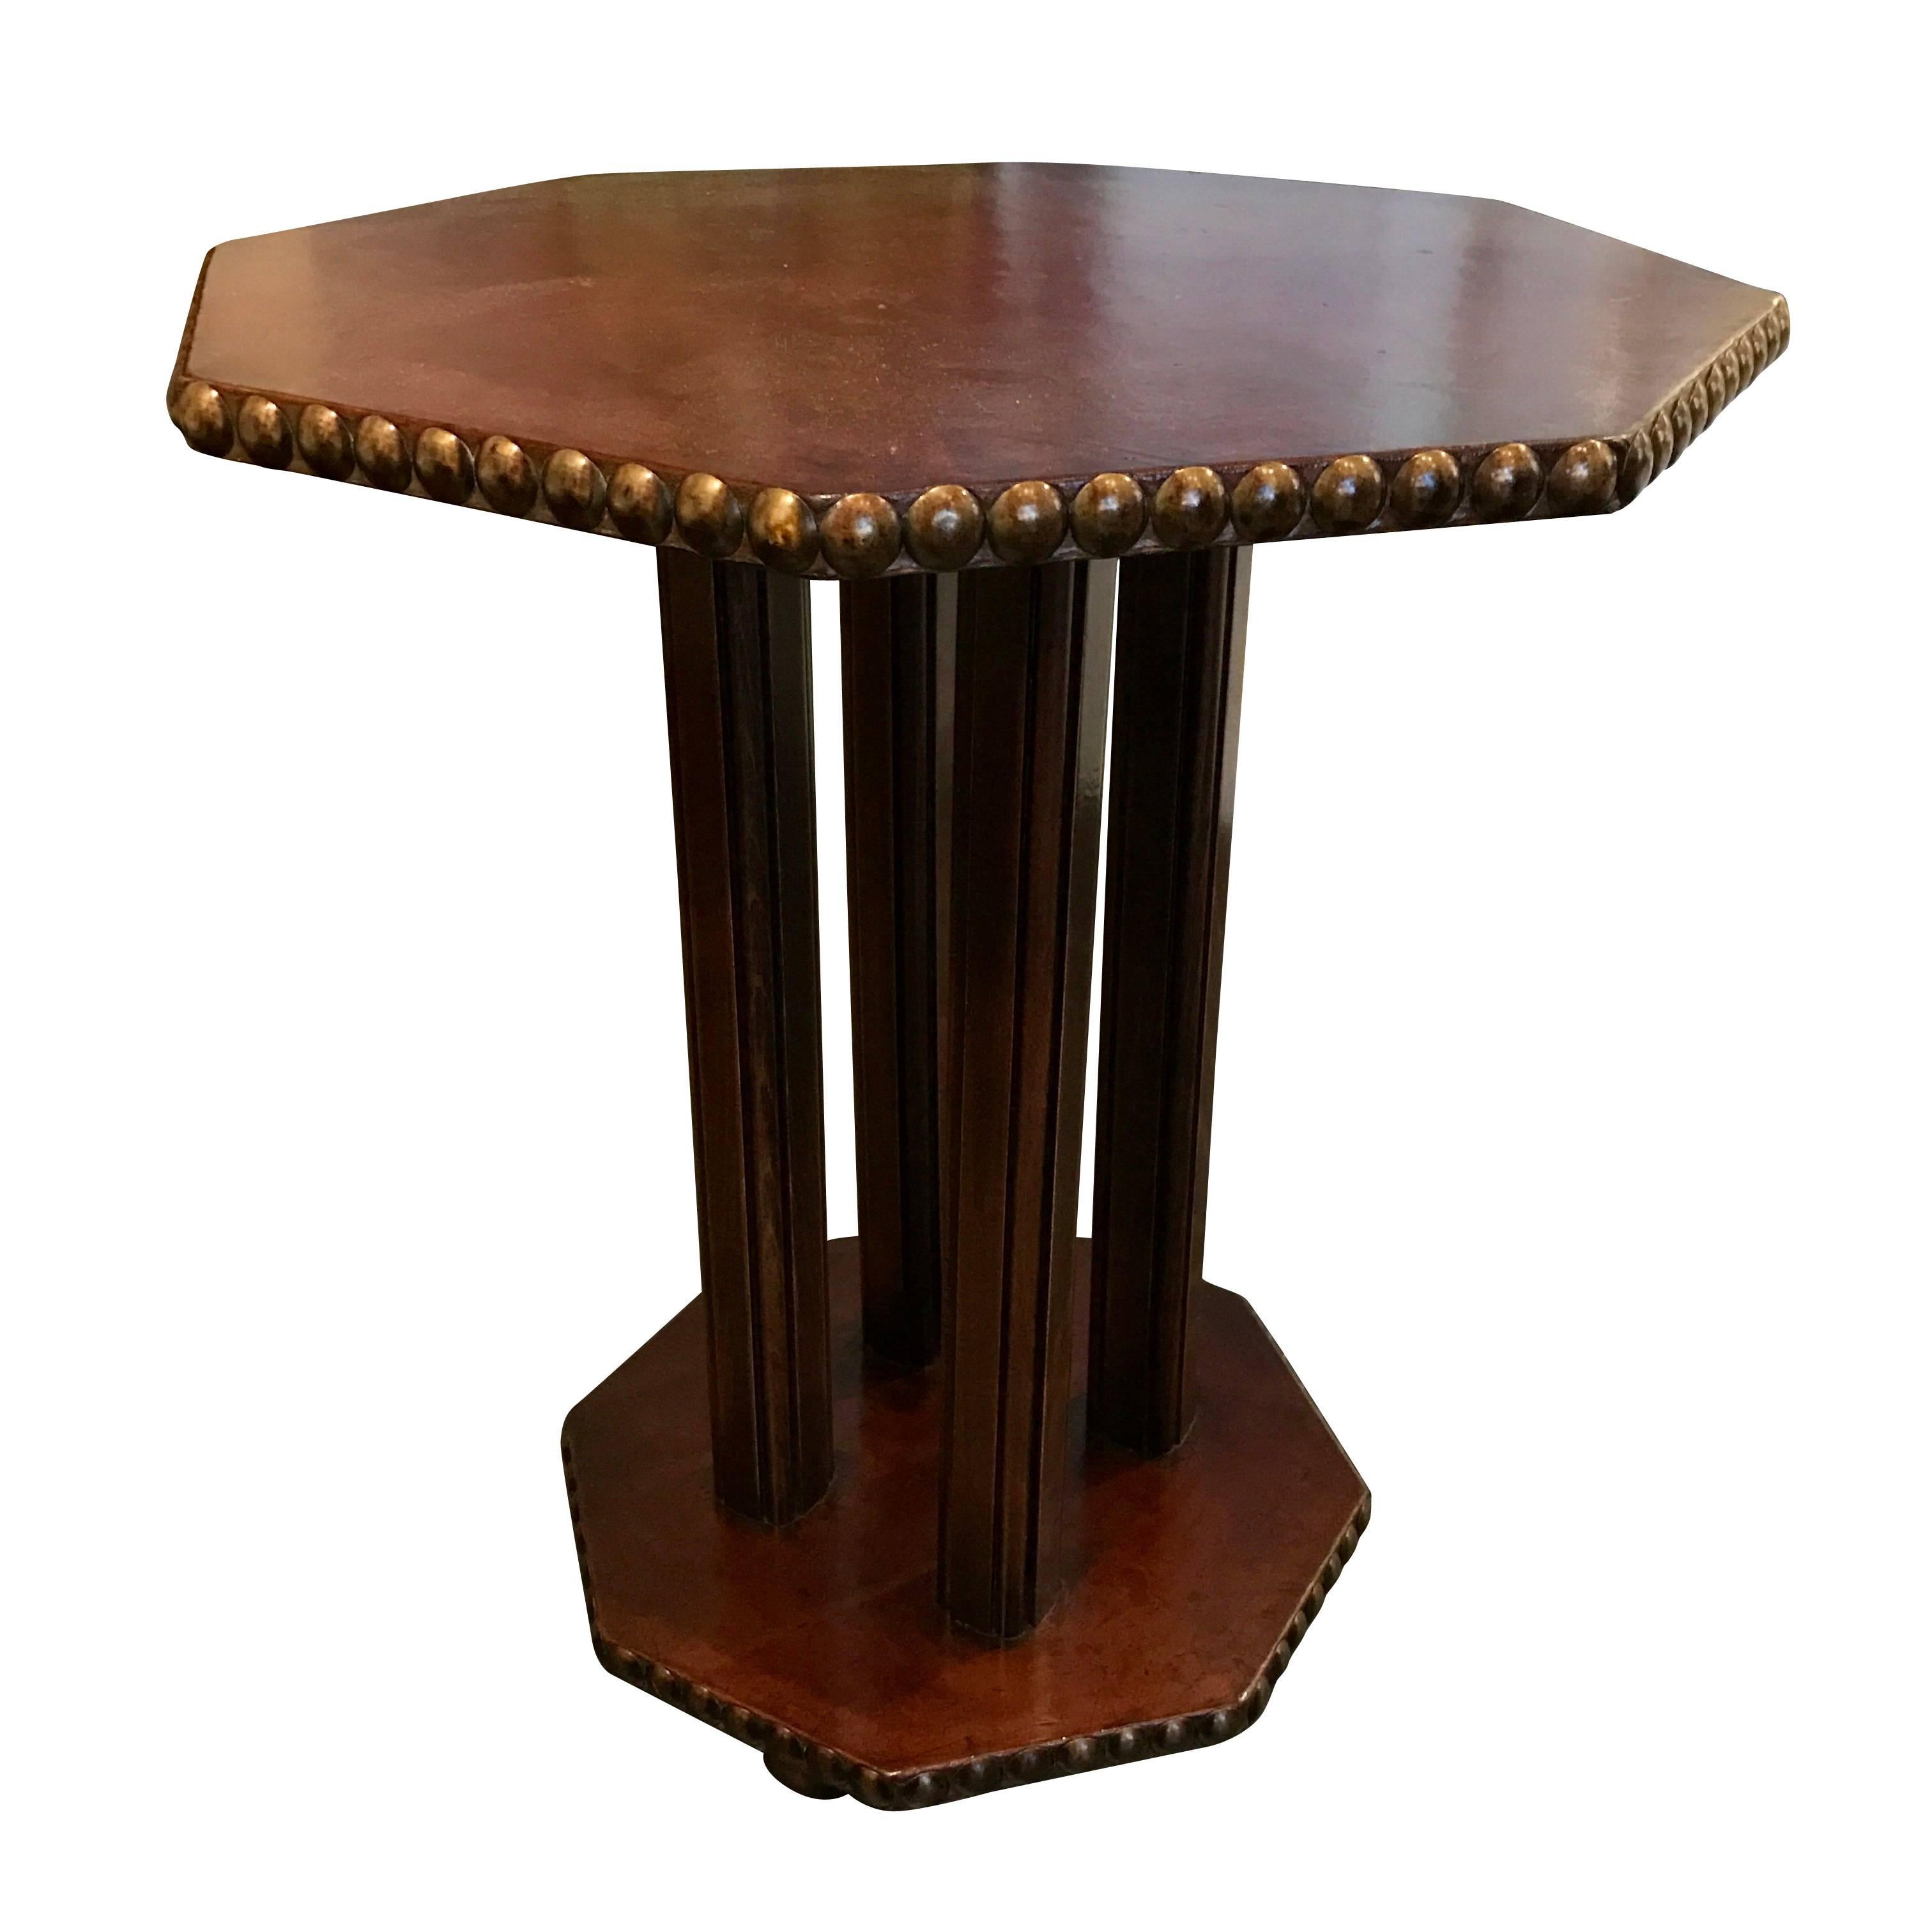 1930s, English octagonally shaped leather top and base side table.
Brass tack details on top and bottom apron.
Four detailed wood column base.